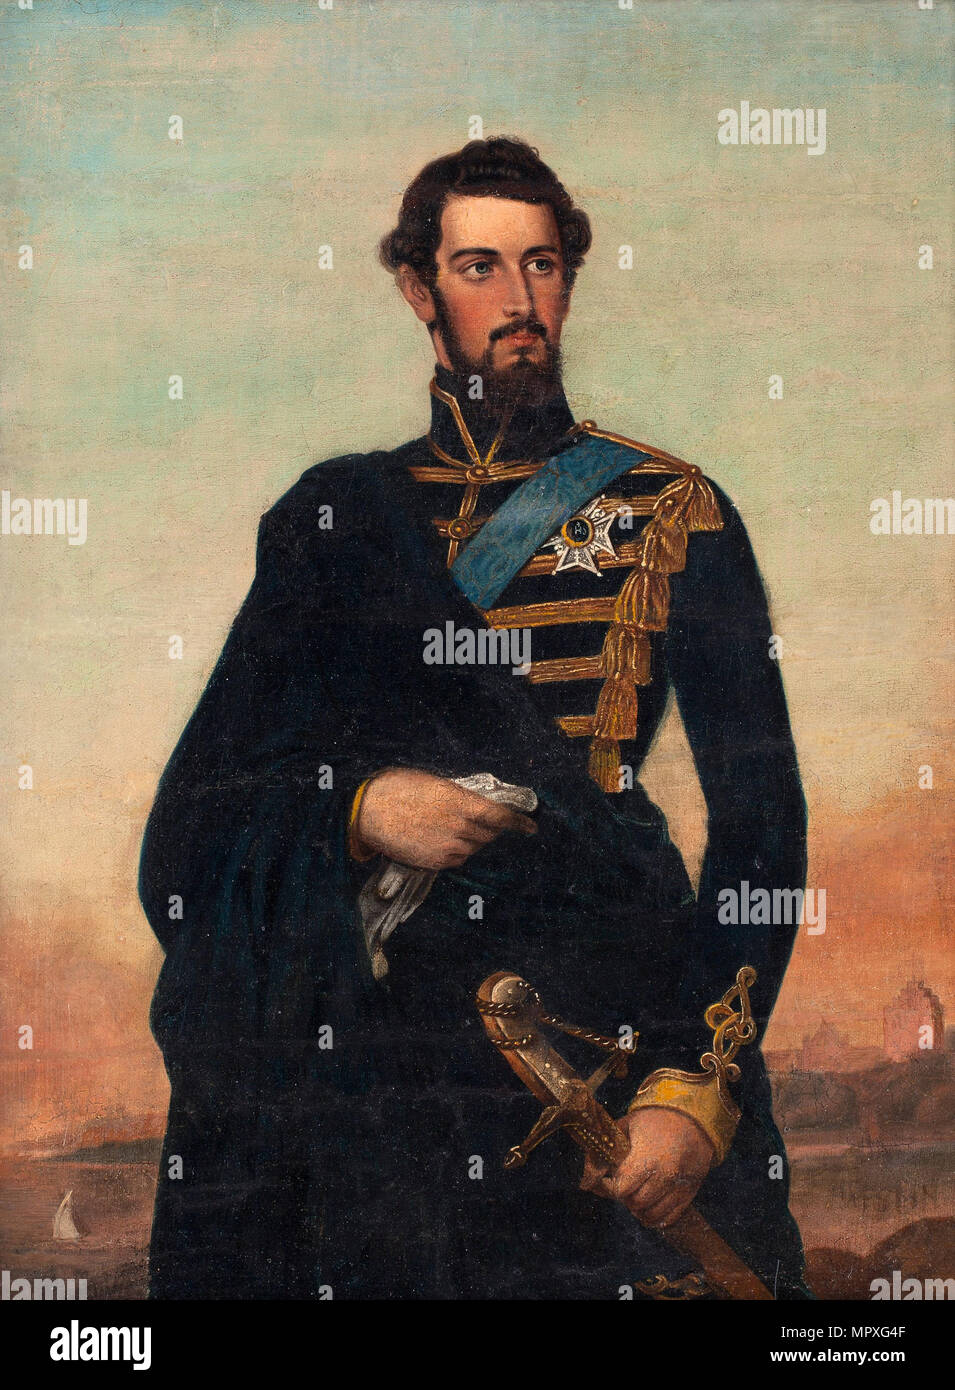 Portrait of the King Charles XV of Sweden. Stock Photo